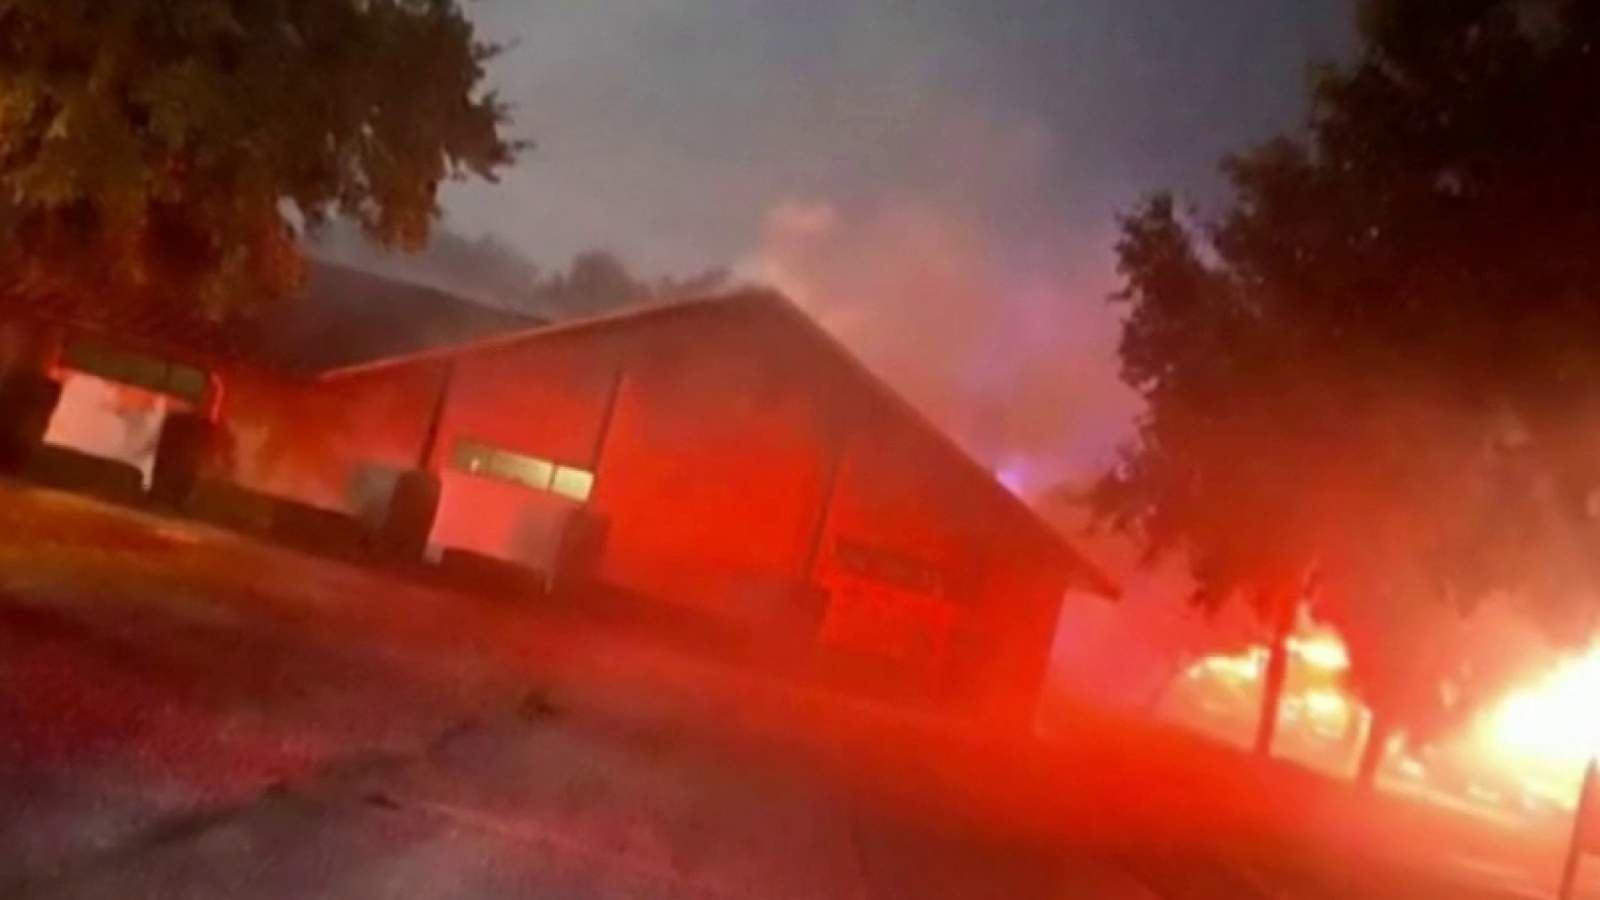 Pastor says Leesburg church will rebuild after fire